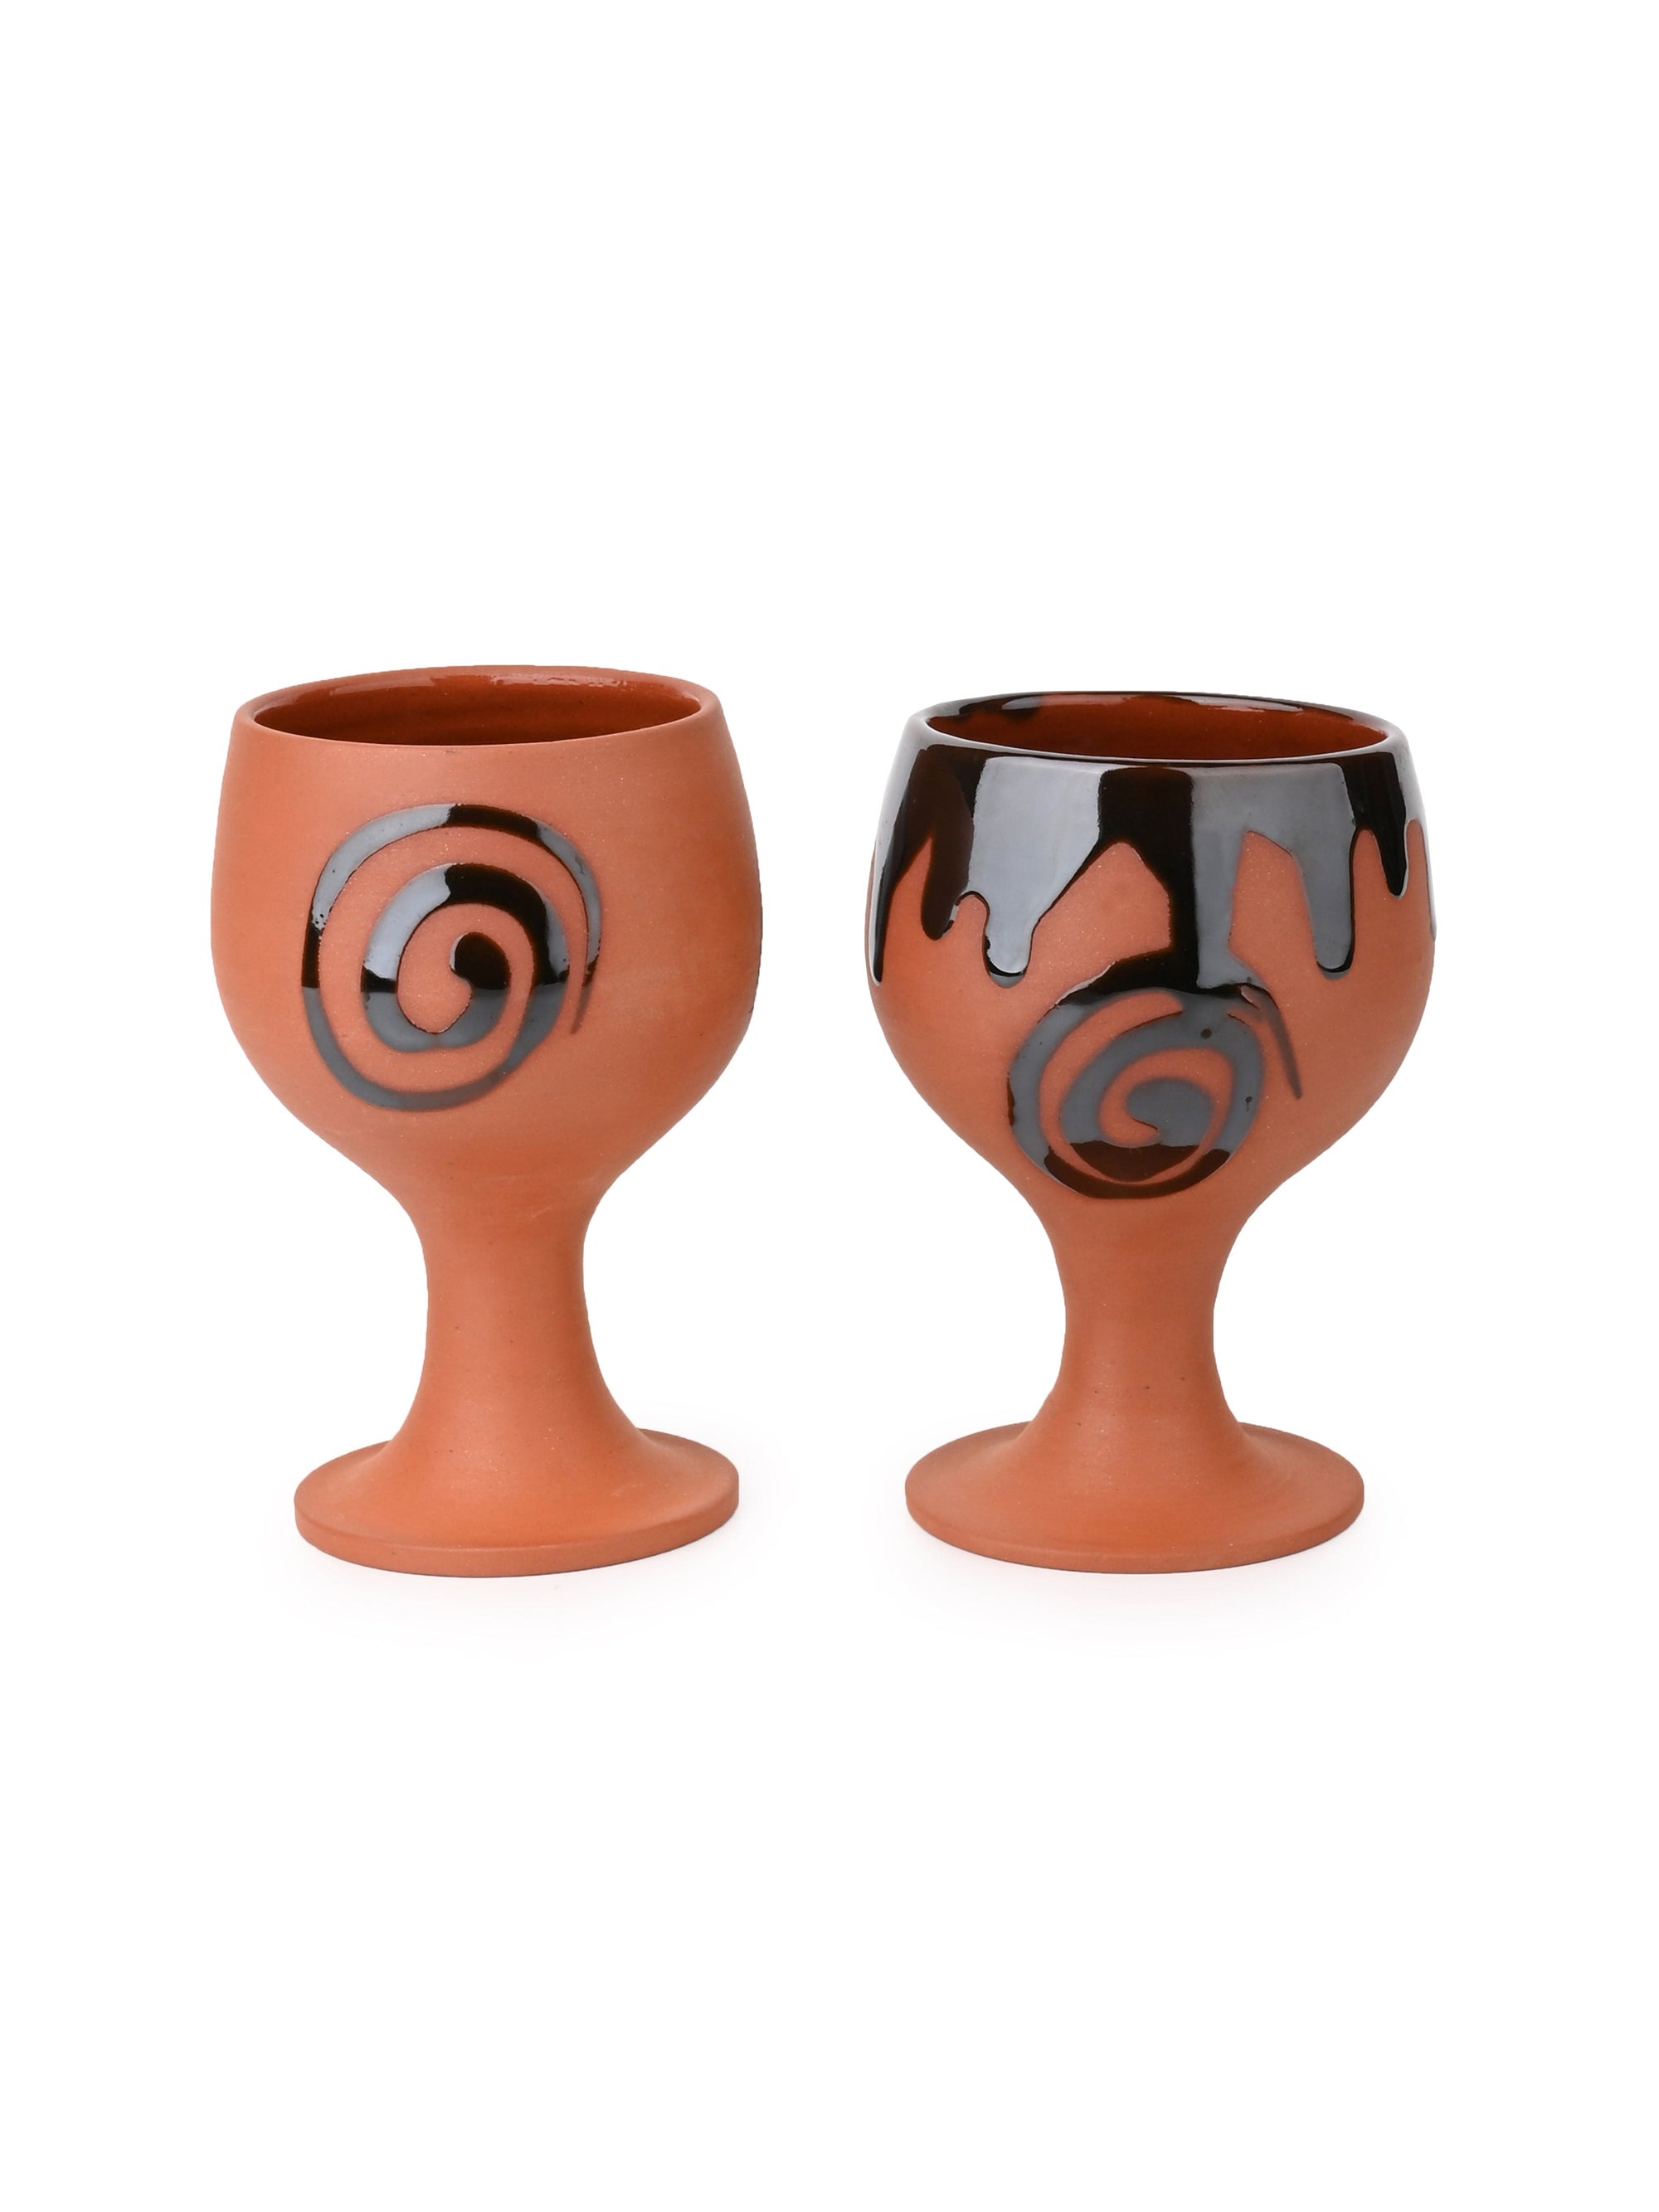 Terracotta Crafted Wine / Liquor Glass Set of 2 pieces